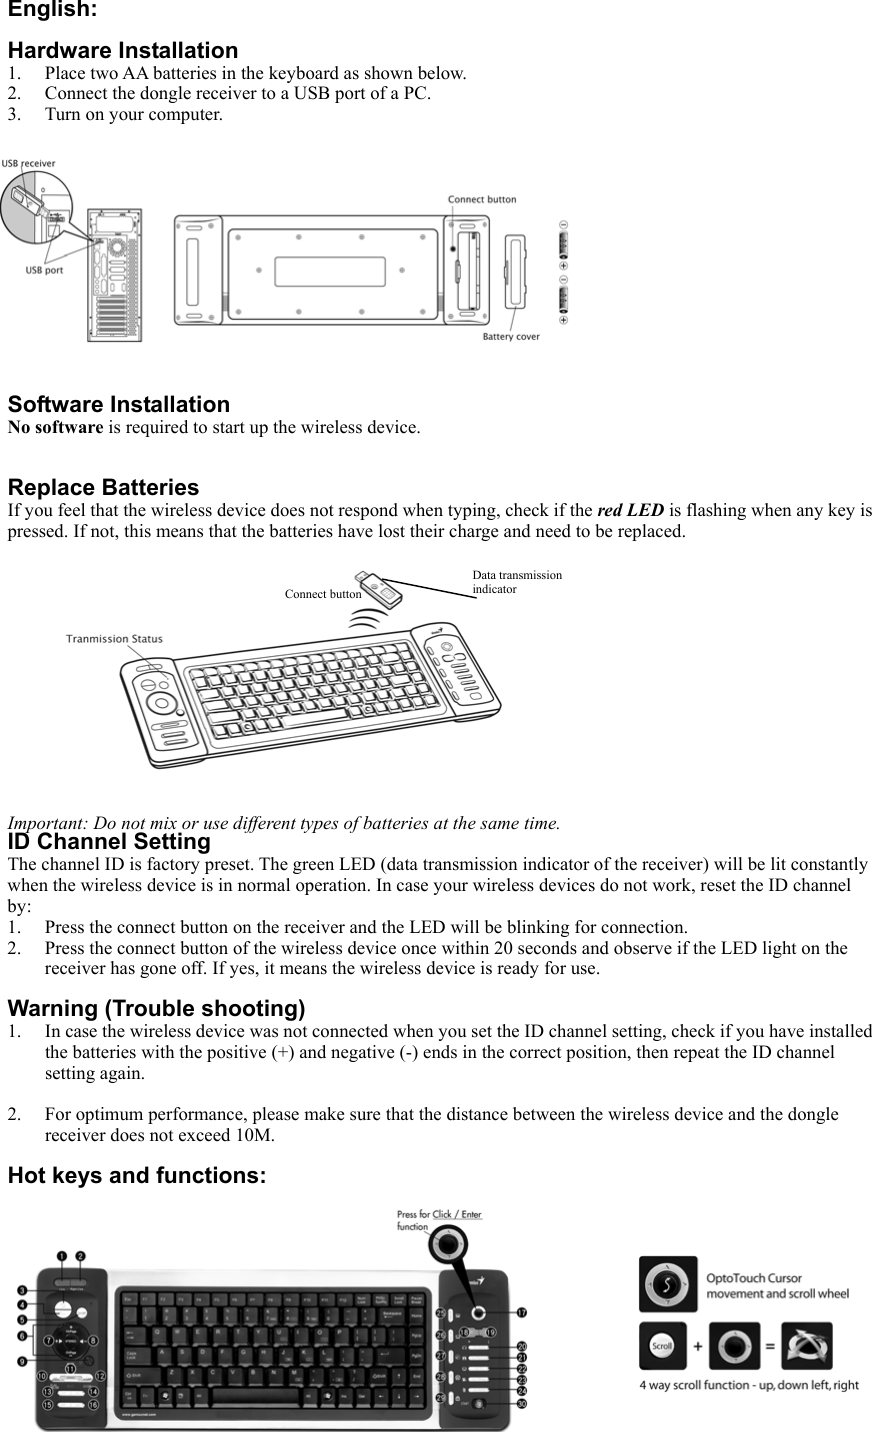 English:  Hardware Installation 1.  Place two AA batteries in the keyboard as shown below. 2.  Connect the dongle receiver to a USB port of a PC. 3.  Turn on your computer.              Software Installation No software is required to start up the wireless device.   Replace Batteries If you feel that the wireless device does not respond when typing, check if the red LED is flashing when any key is pressed. If not, this means that the batteries have lost their charge and need to be replaced.              Important: Do not mix or use different types of batteries at the same time. ID Channel Setting The channel ID is factory preset. The green LED (data transmission indicator of the receiver) will be lit constantly when the wireless device is in normal operation. In case your wireless devices do not work, reset the ID channel by: 1.  Press the connect button on the receiver and the LED will be blinking for connection.   2.  Press the connect button of the wireless device once within 20 seconds and observe if the LED light on the receiver has gone off. If yes, it means the wireless device is ready for use.  Warning (Trouble shooting) 1.  In case the wireless device was not connected when you set the ID channel setting, check if you have installed the batteries with the positive (+) and negative (-) ends in the correct position, then repeat the ID channel setting again.  2.  For optimum performance, please make sure that the distance between the wireless device and the dongle receiver does not exceed 10M.  Hot keys and functions:             Data transmission indicator Connect button